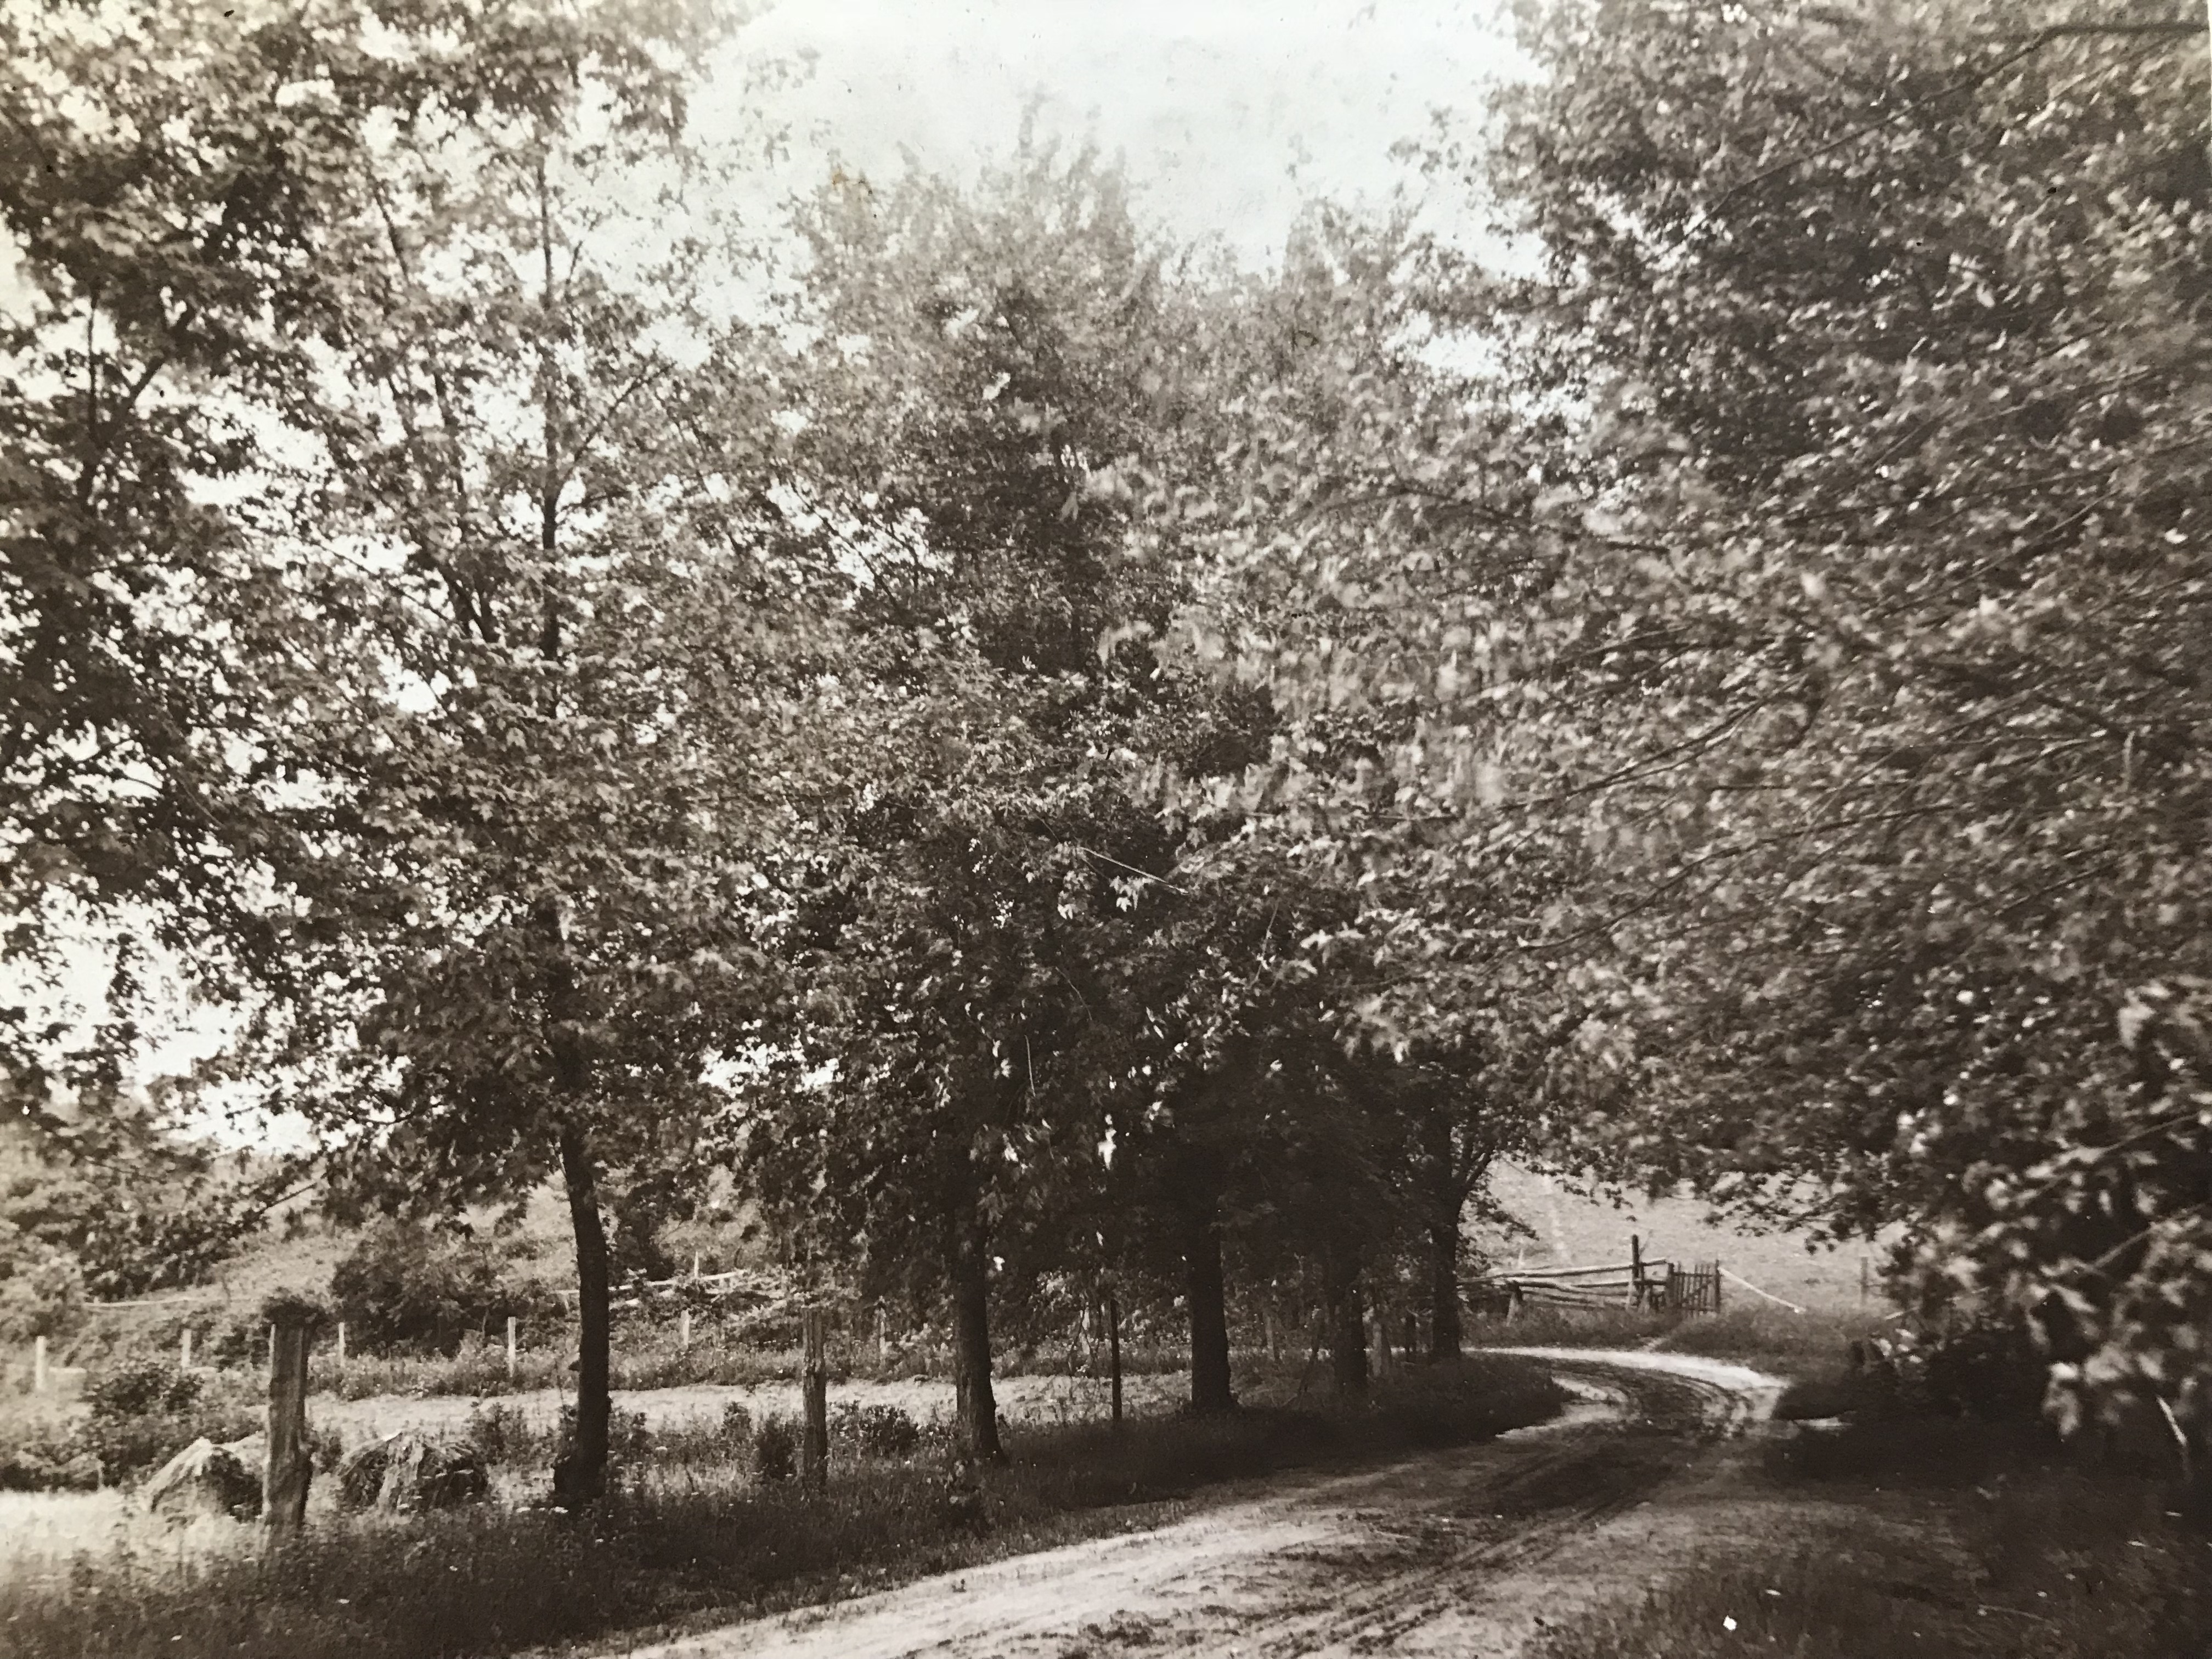 Rural Montgomery County road